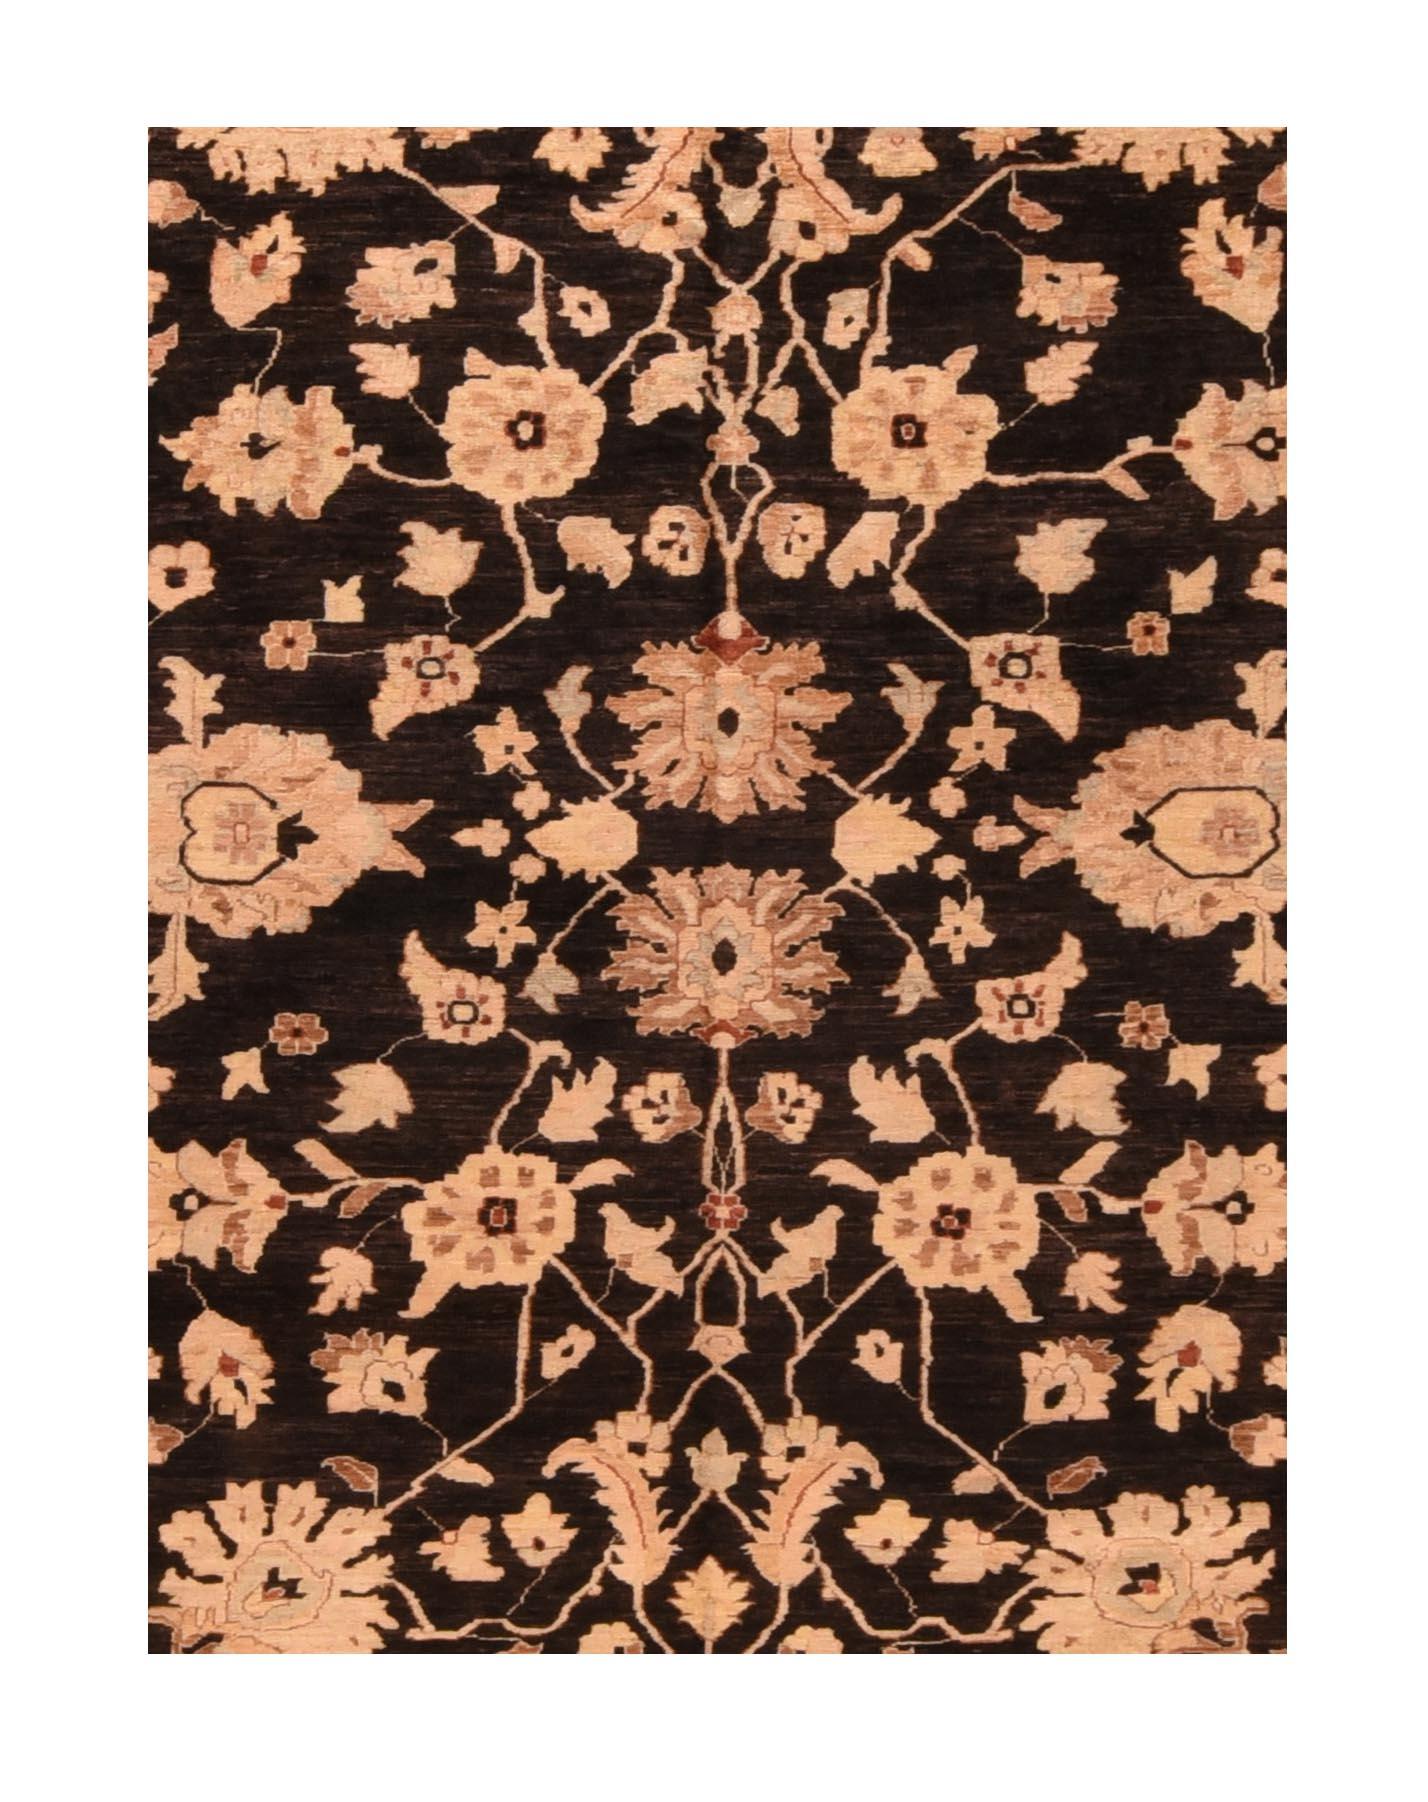 Fine Peshawar Pakistani rug, hand knotted

Design: Floral

A Pakistani rug (Pak Persian rug or Pakistani carpet) is a type of handmade floor-covering textile traditionally made in Pakistan.

Peshawar rugs, also called Ghazni rugs or Chobi rugs